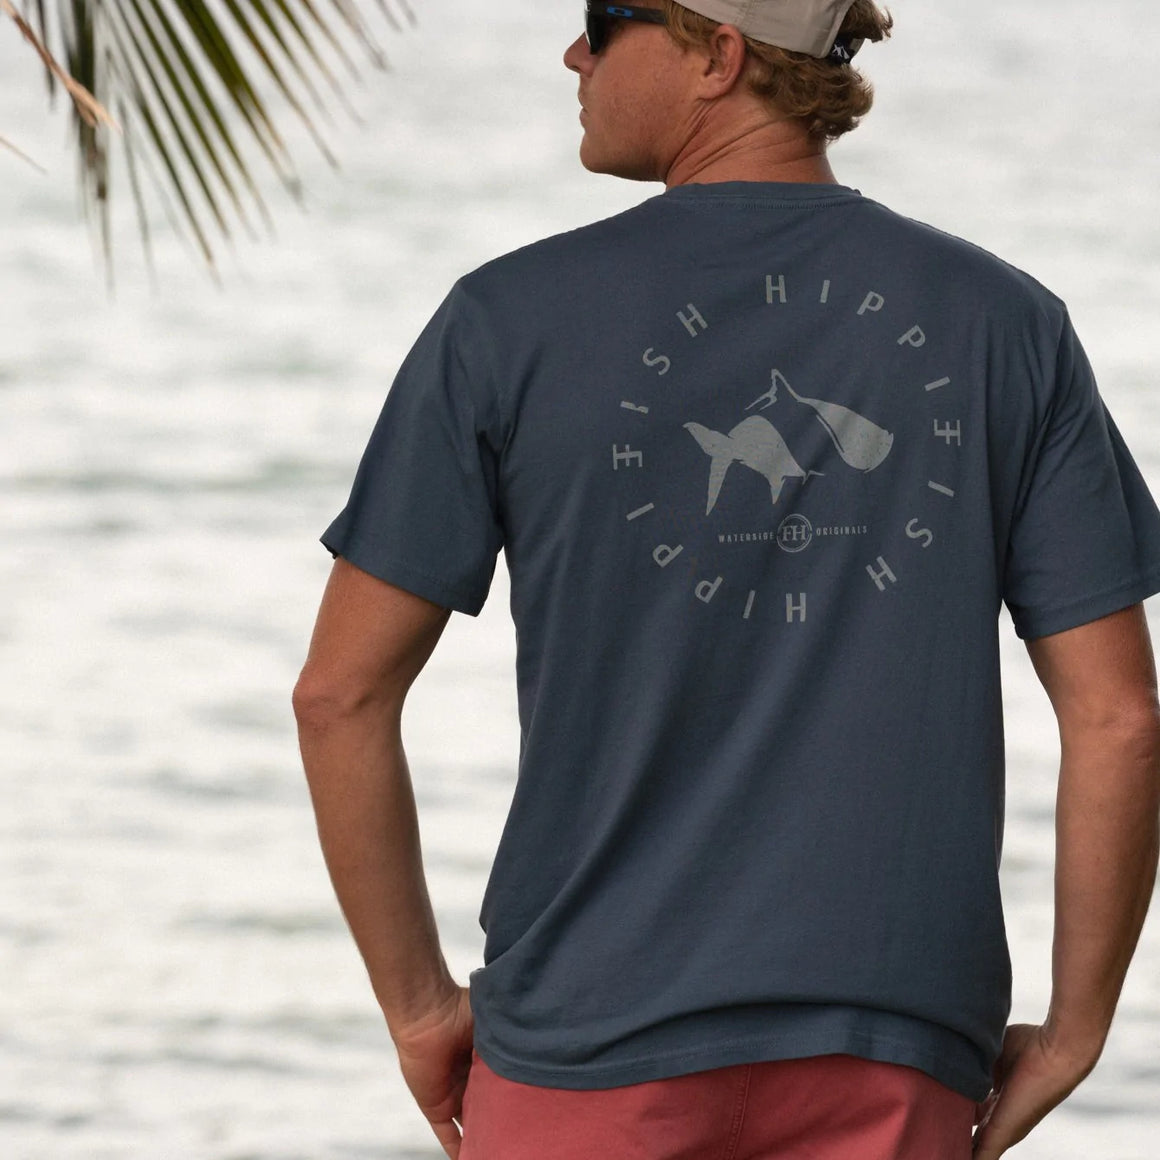 Fish Hippie Roundabout Tee.